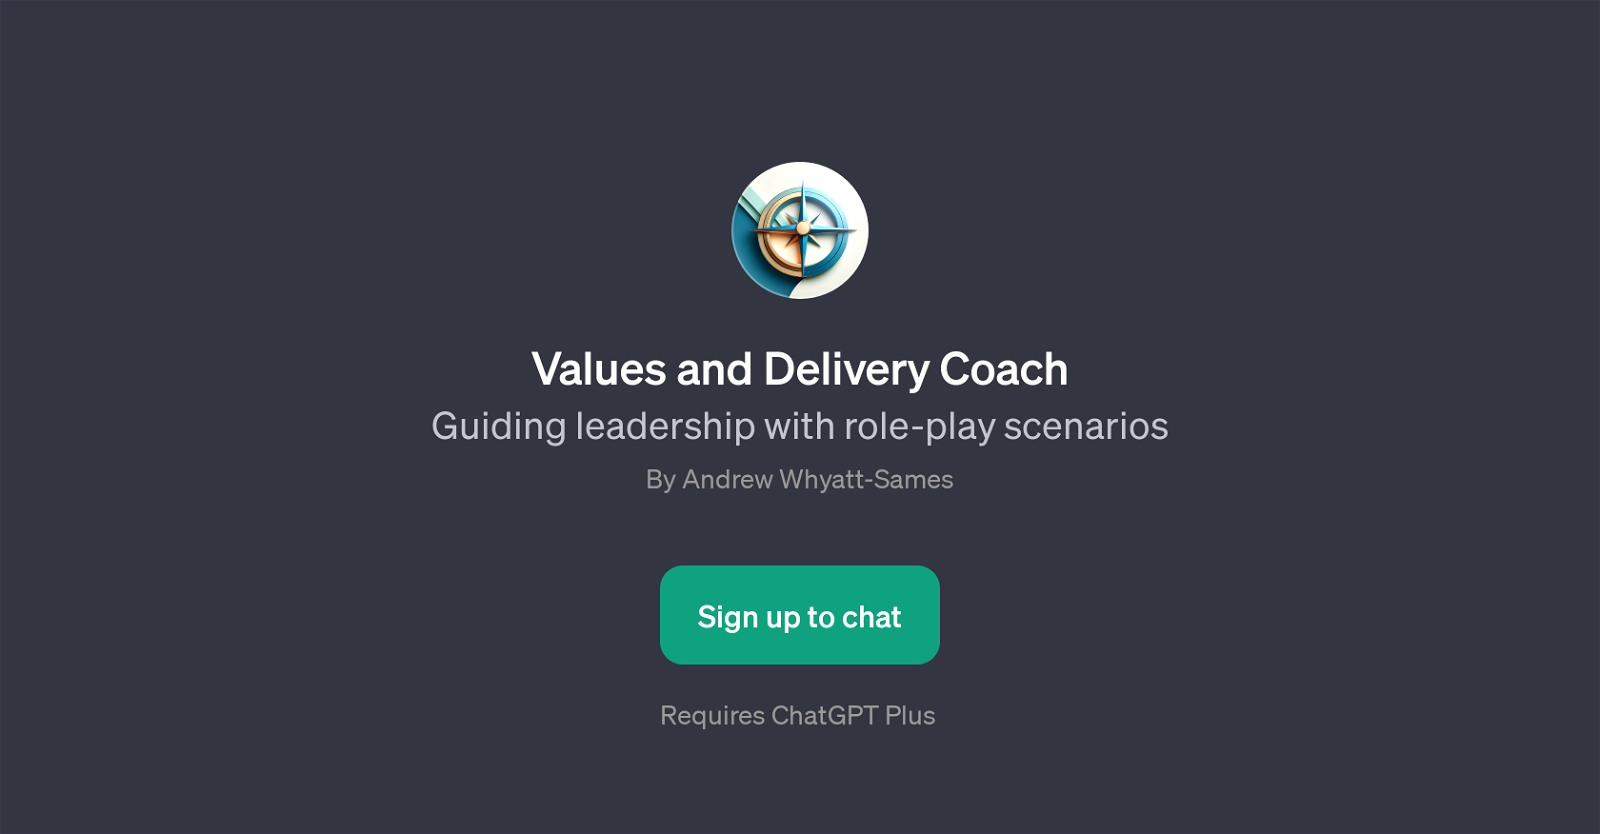 Values and Delivery Coach website